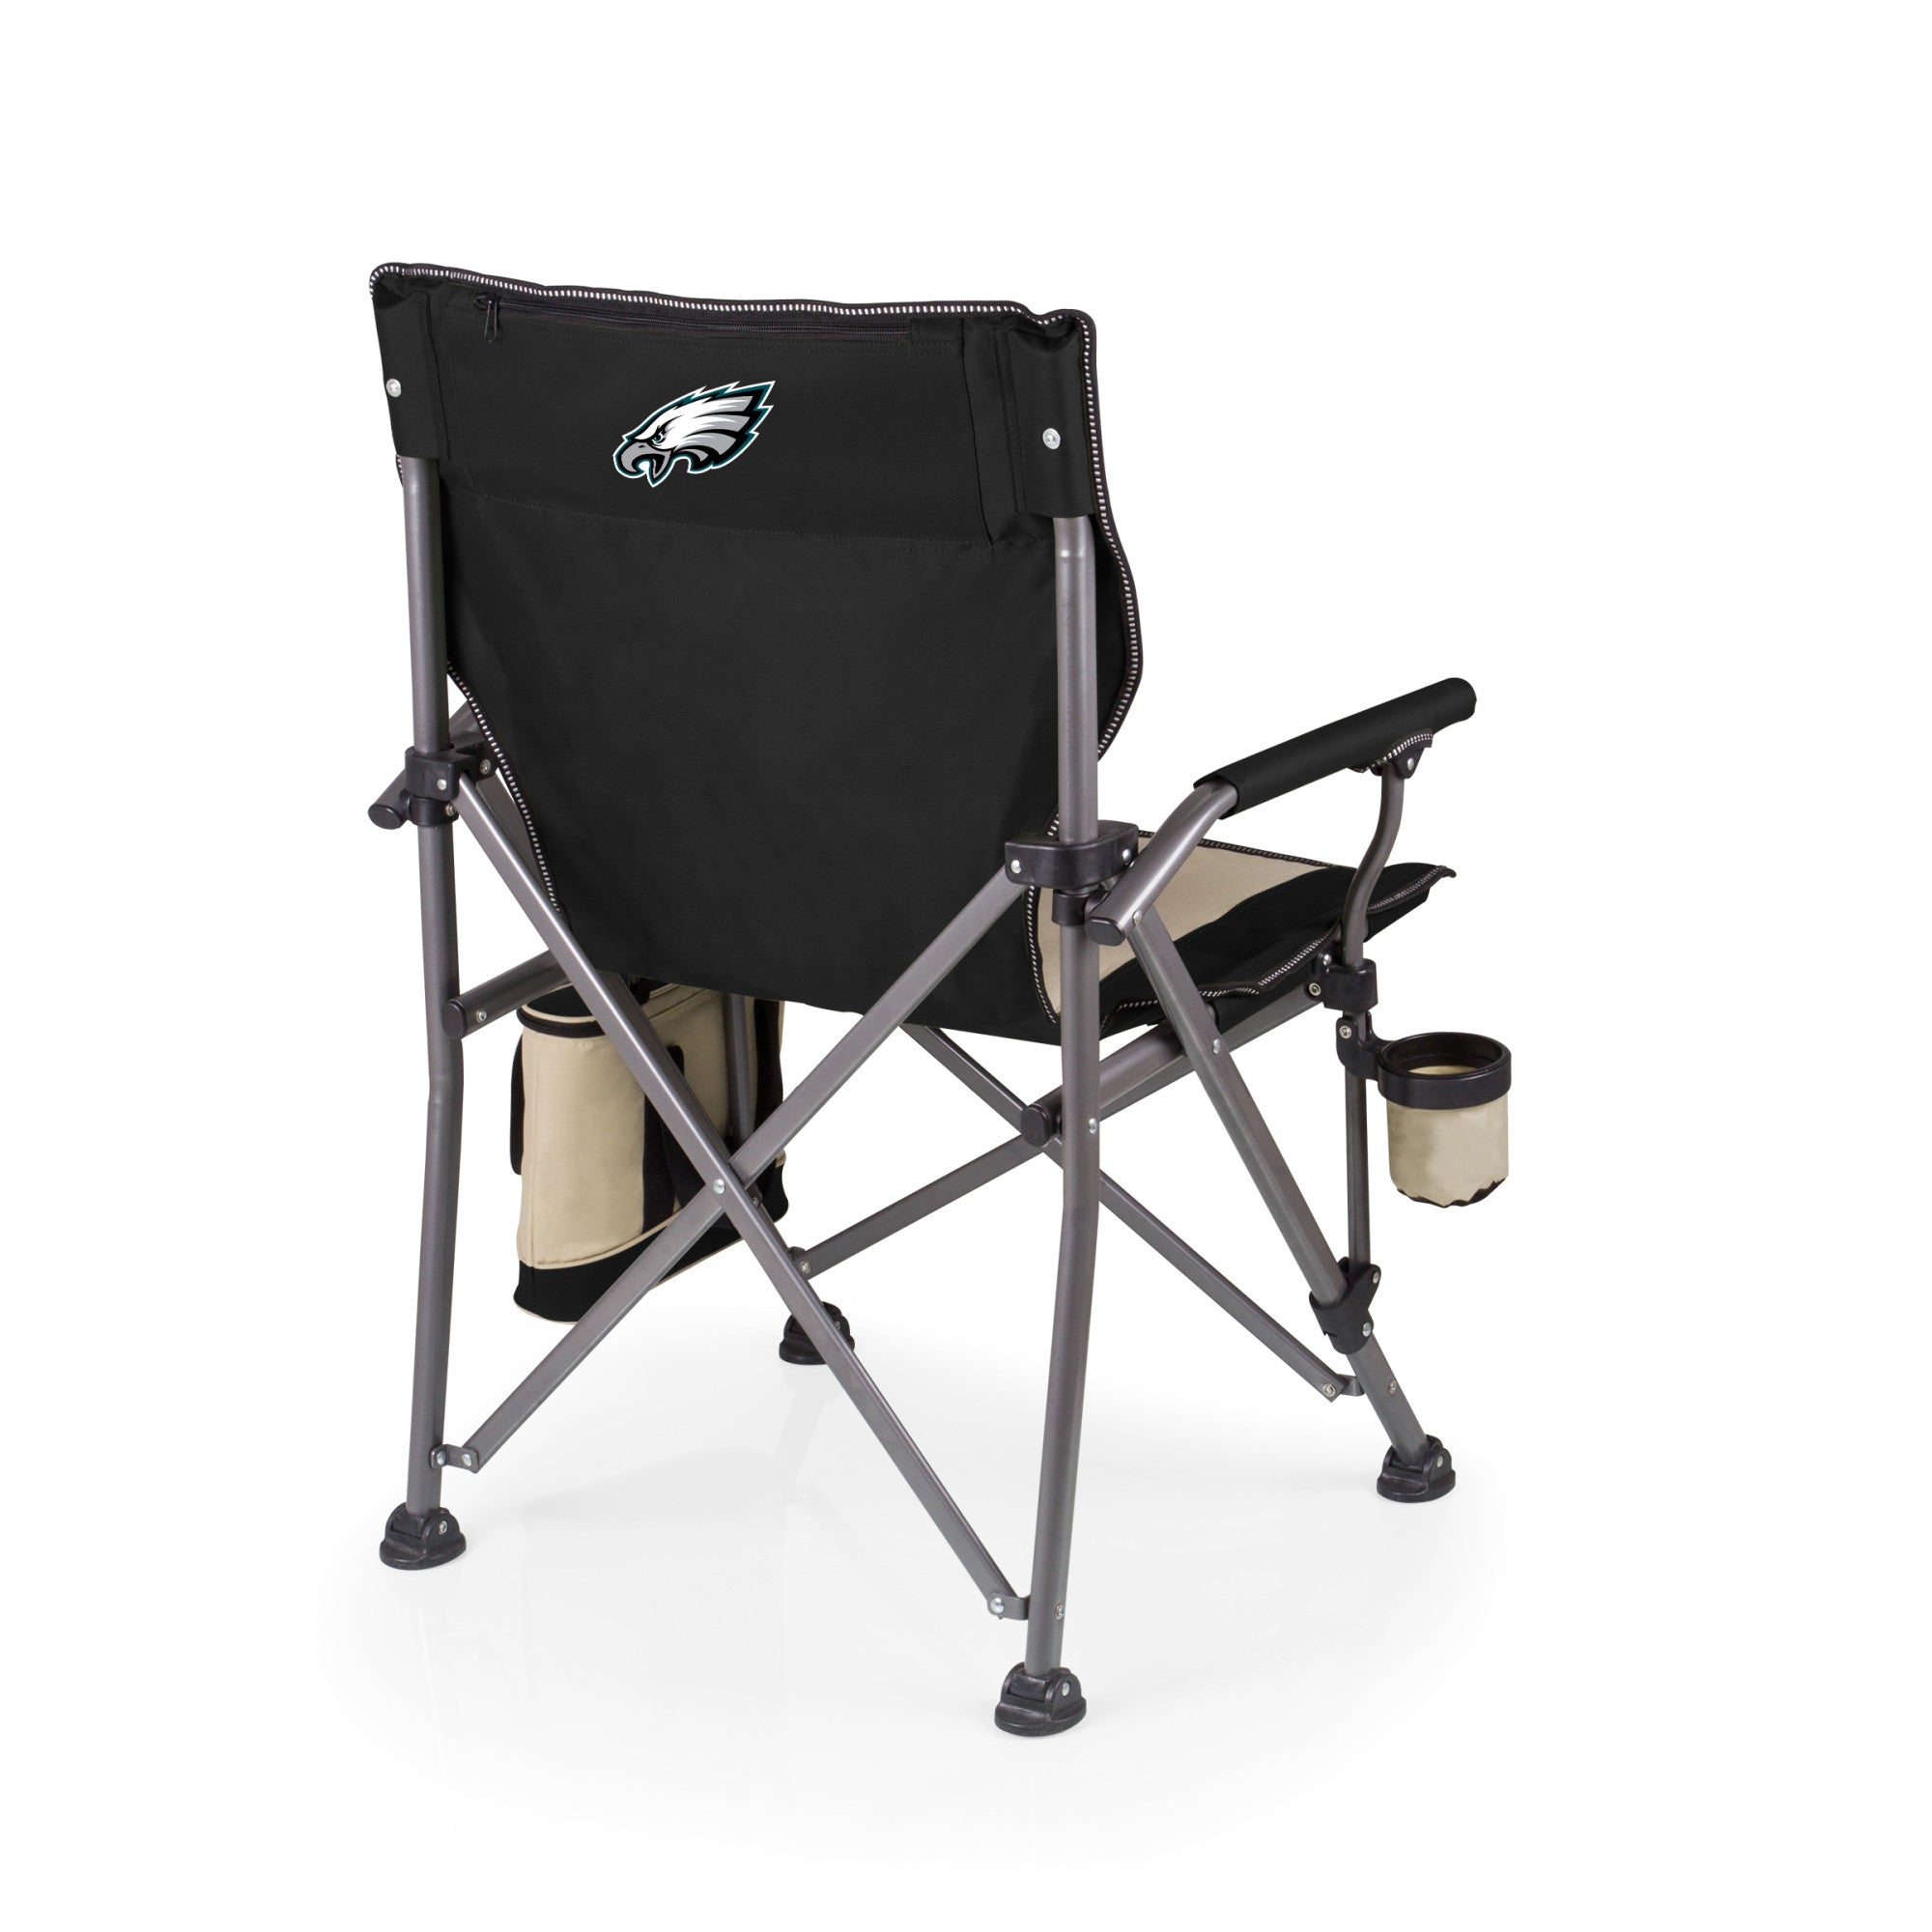 Philadelphia Eagles - Outlander Folding Camping Chair with Cooler